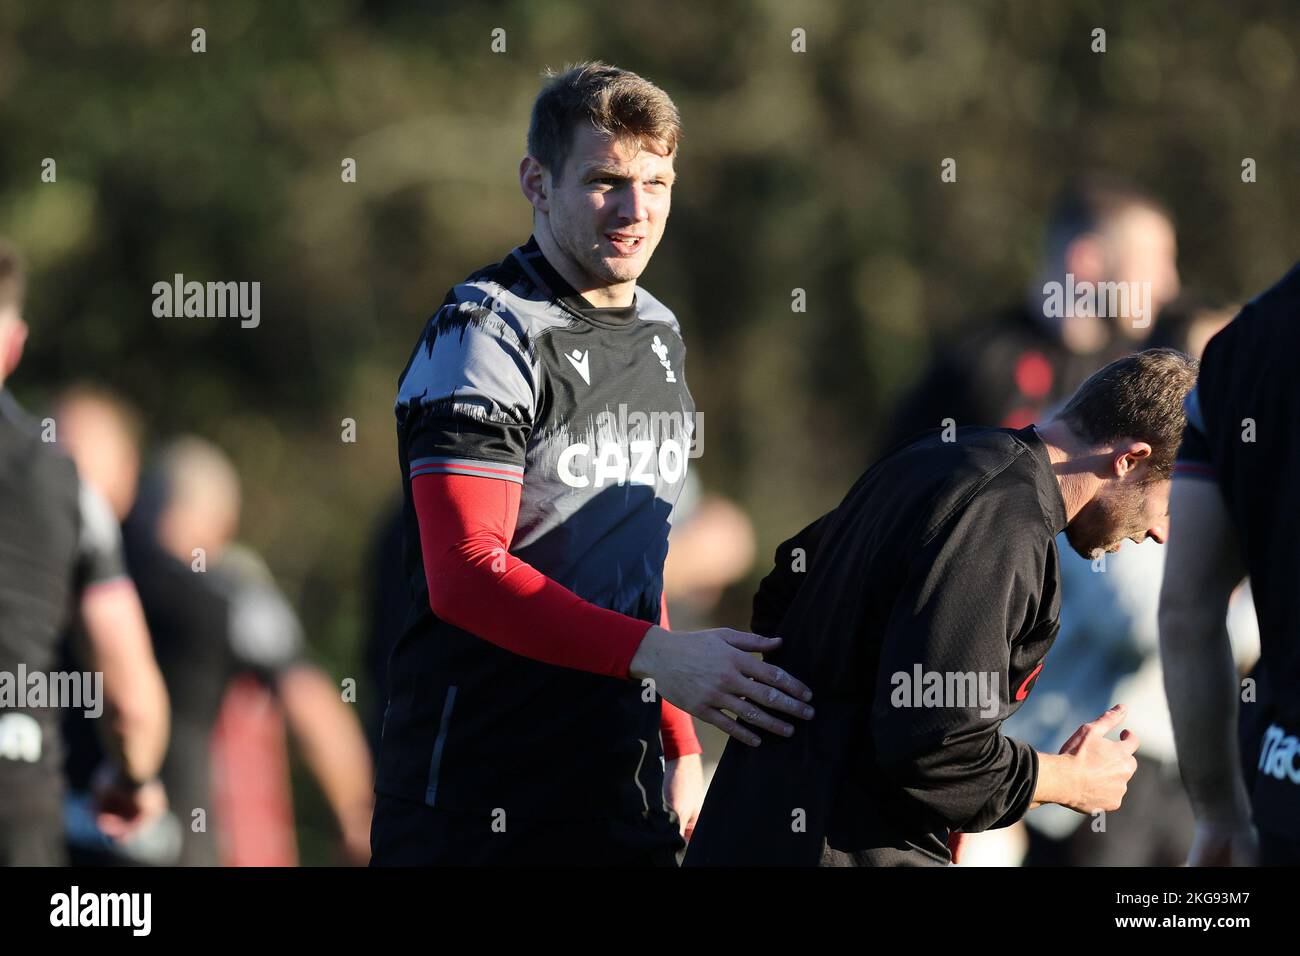 Cardiff, UK. 22nd Nov, 2022. Dan Biggar of Wales during the Wales rugby training session, Vale of Glamorgan on Tuesday 22nd November 2022. pic by Andrew Orchard/Andrew Orchard sports photography/ Alamy Live News Credit: Andrew Orchard sports photography/Alamy Live News Stock Photo